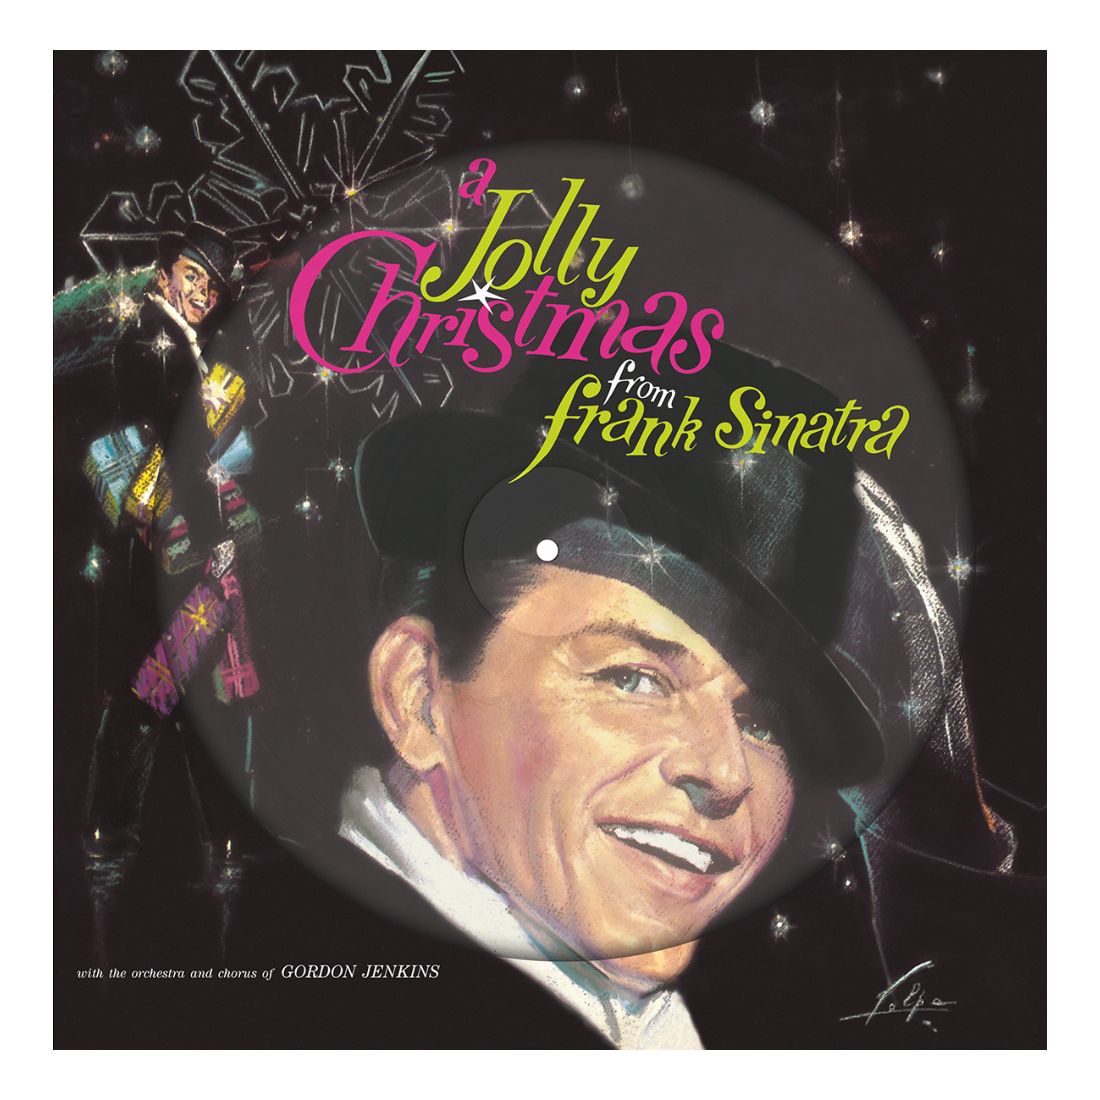 Виниловая пластинка A Jolly Christmas from Frank Sinatra (Picture Disc) | Frank Sinatra frank sinatra frank sinatra a jolly christmas from frank sinatra colour